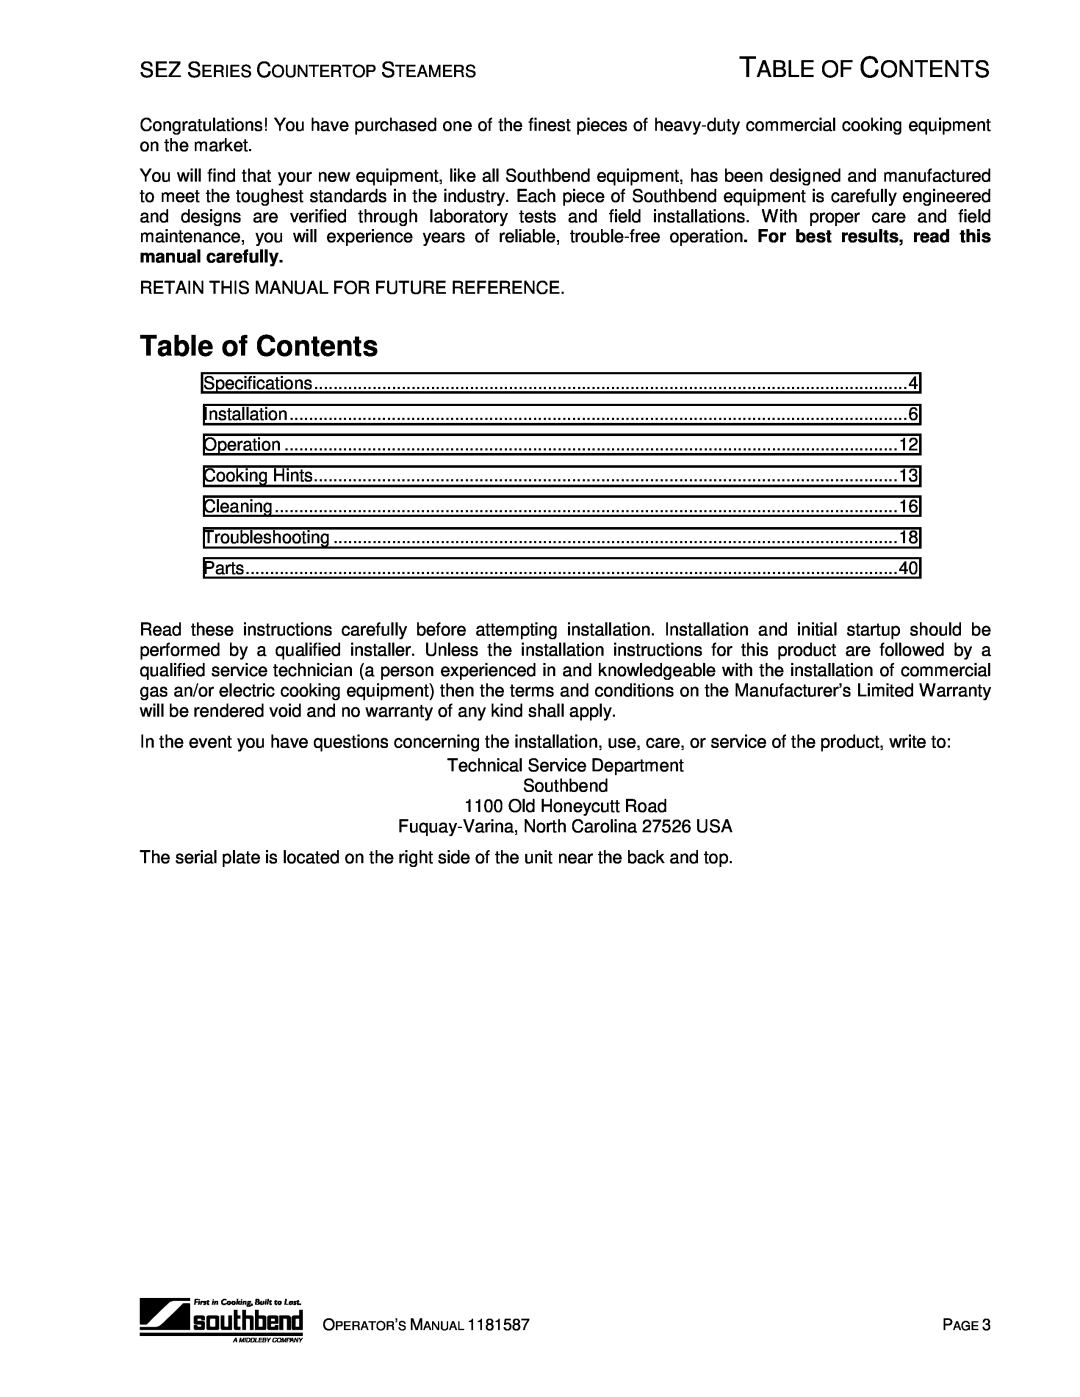 Southbend SEZ-3, SEZ-5 manual Table Of Contents, Table of Contents 